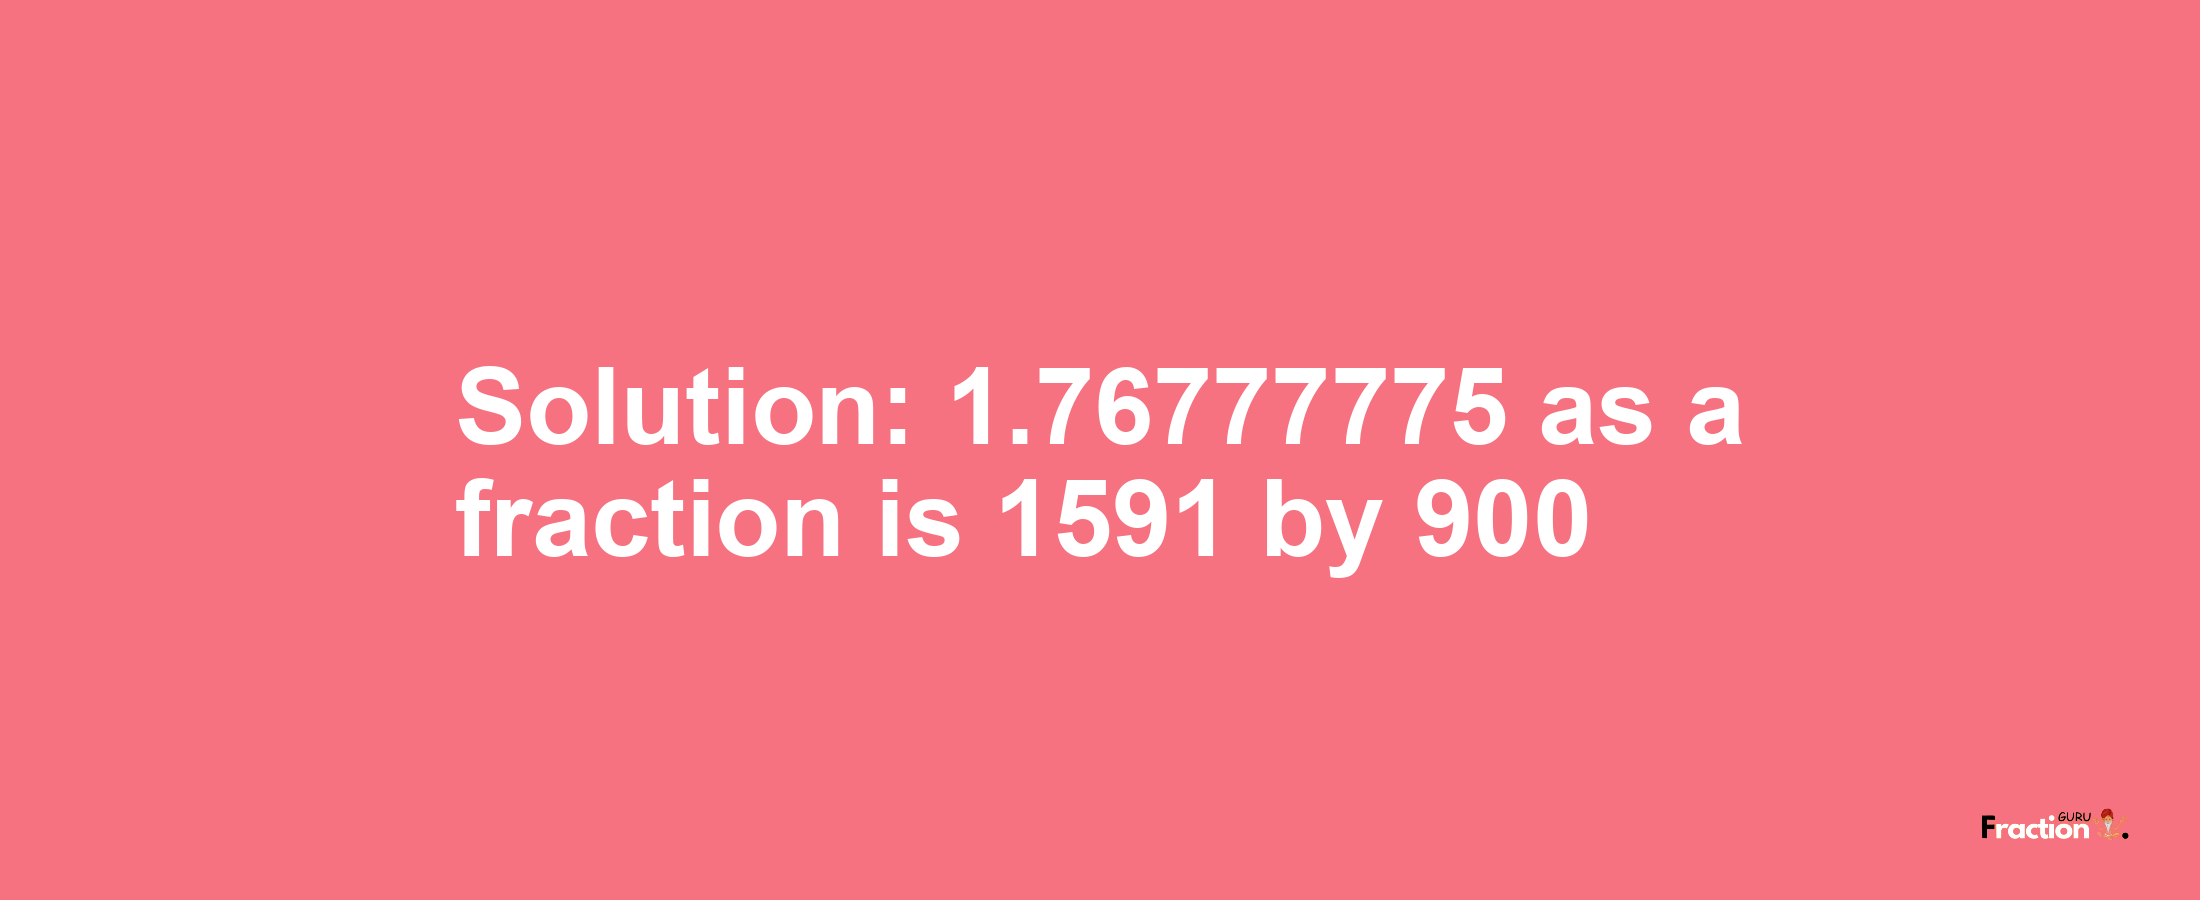 Solution:1.76777775 as a fraction is 1591/900